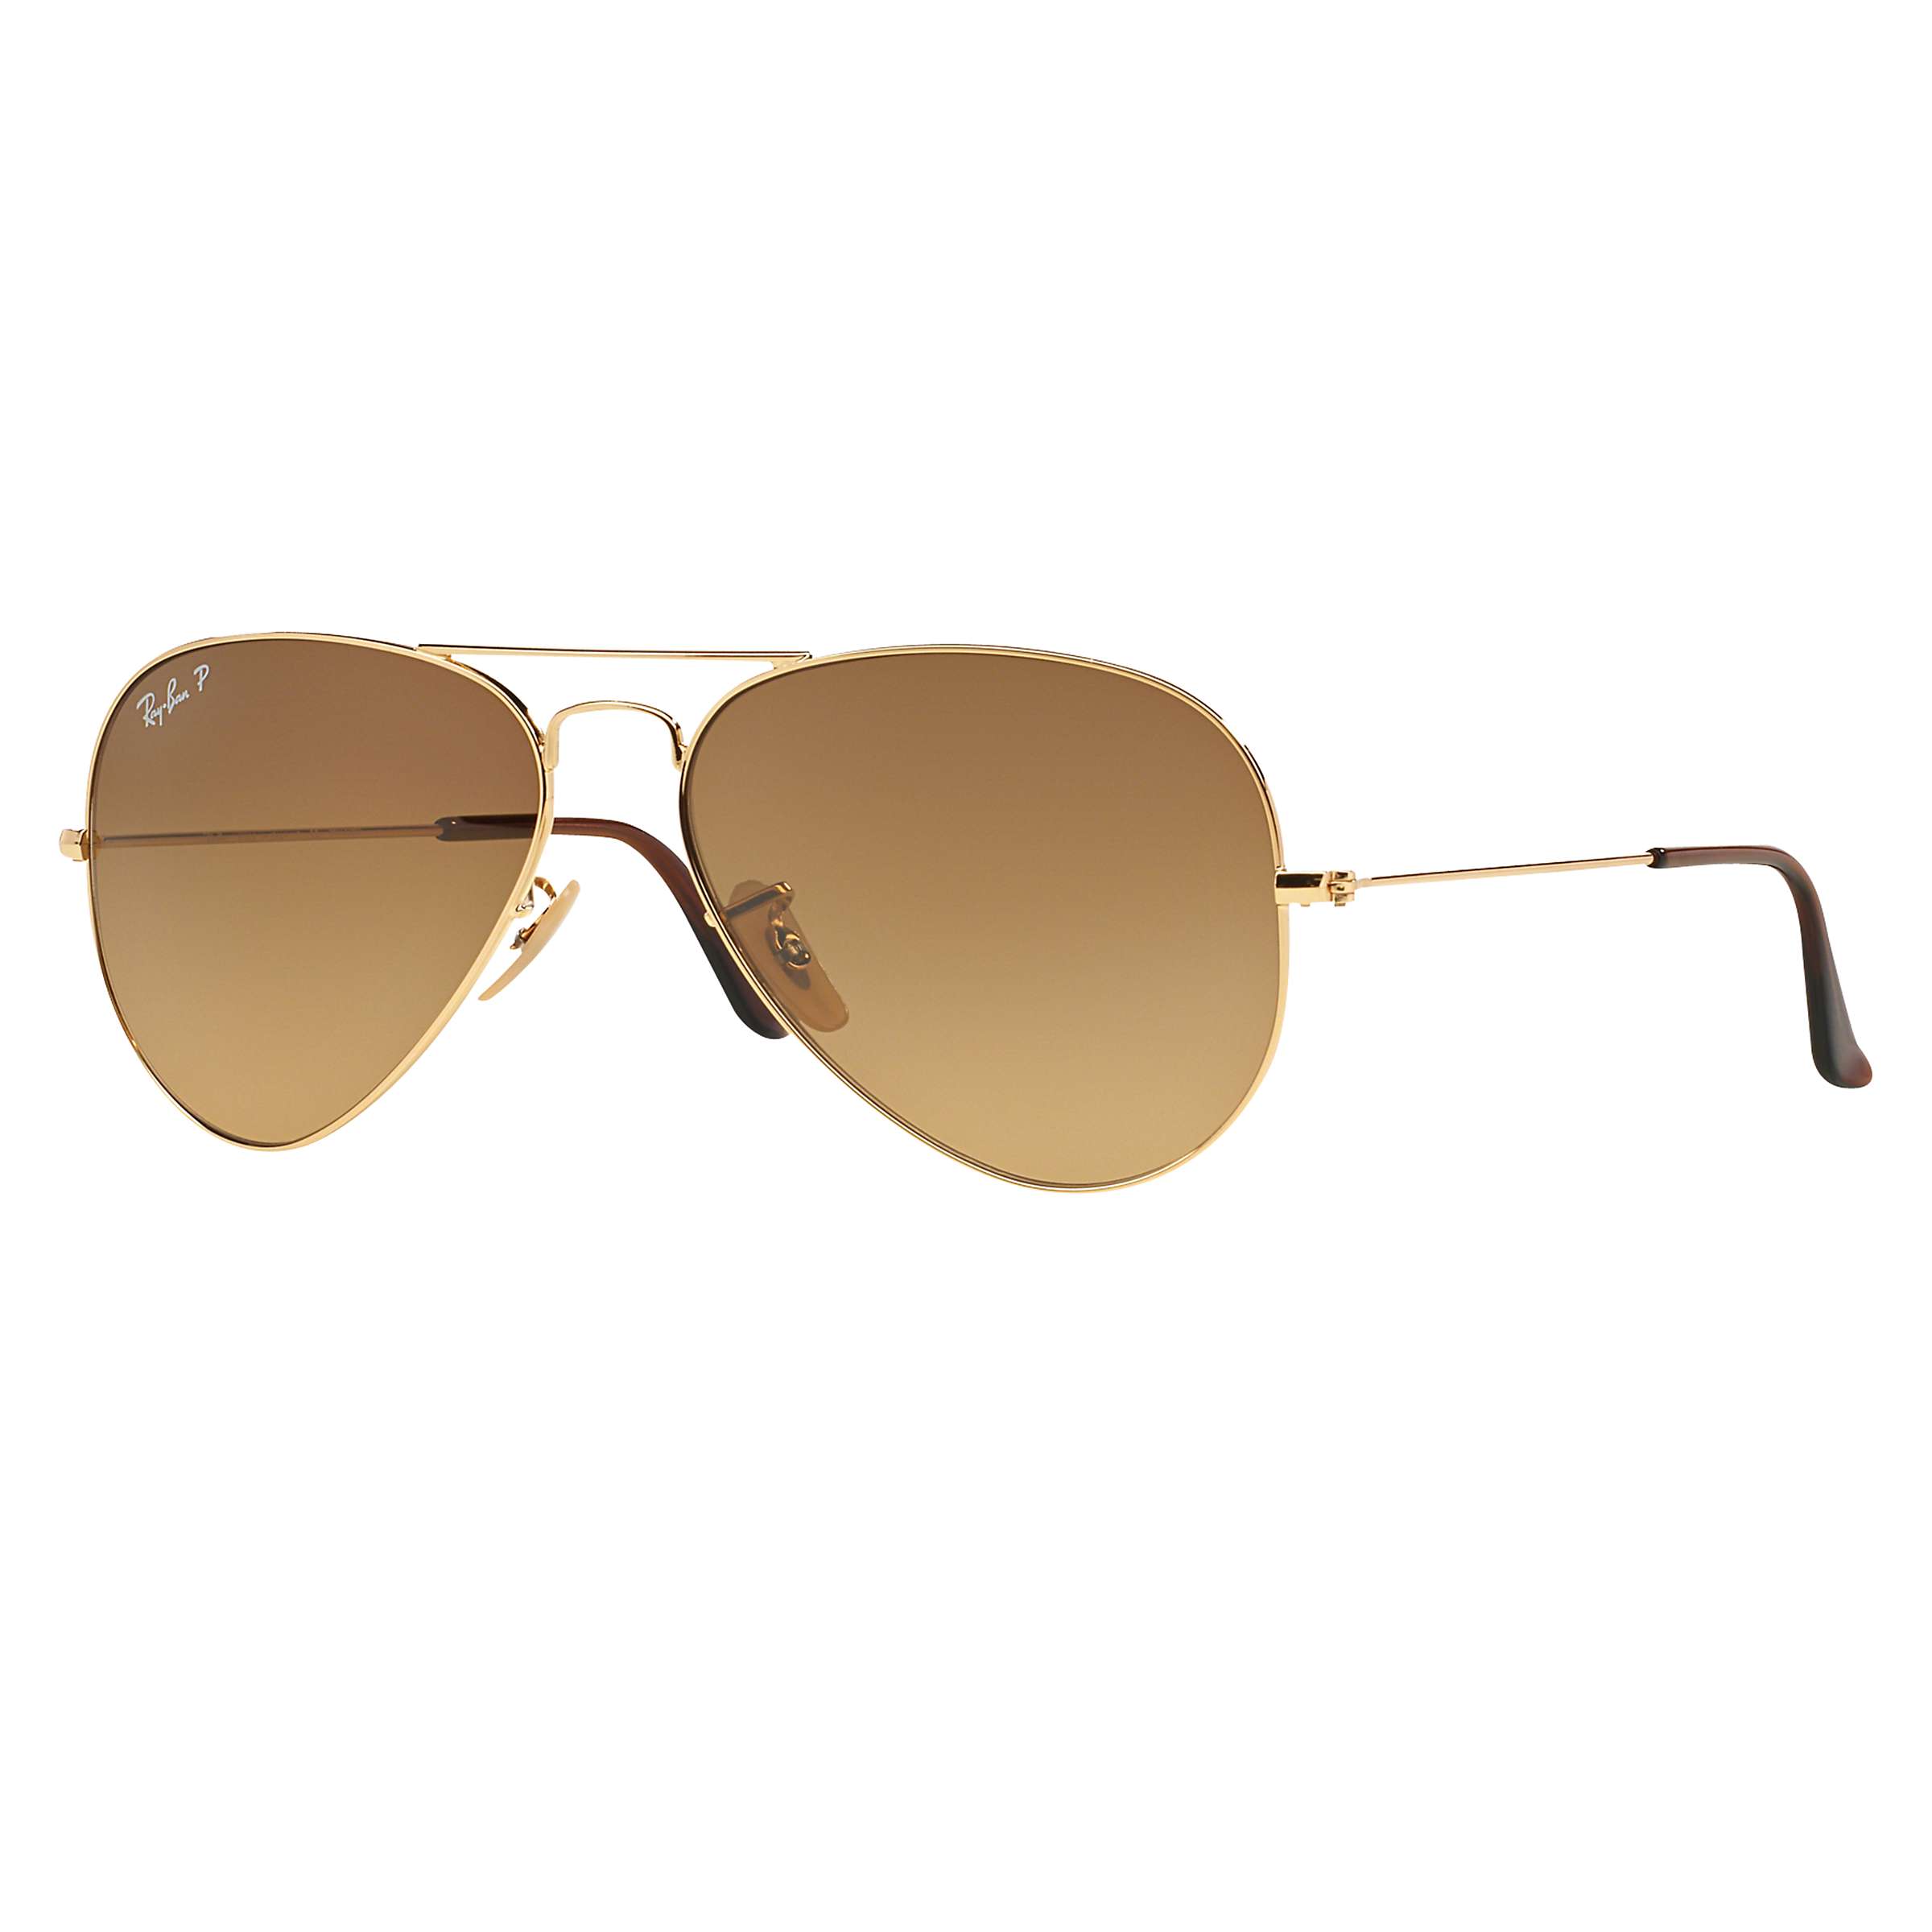 Ray Ban Rb3025 Unisex Polarised Aviator Sunglasses Shiny Gold Brown Gradient At John Lewis Partners